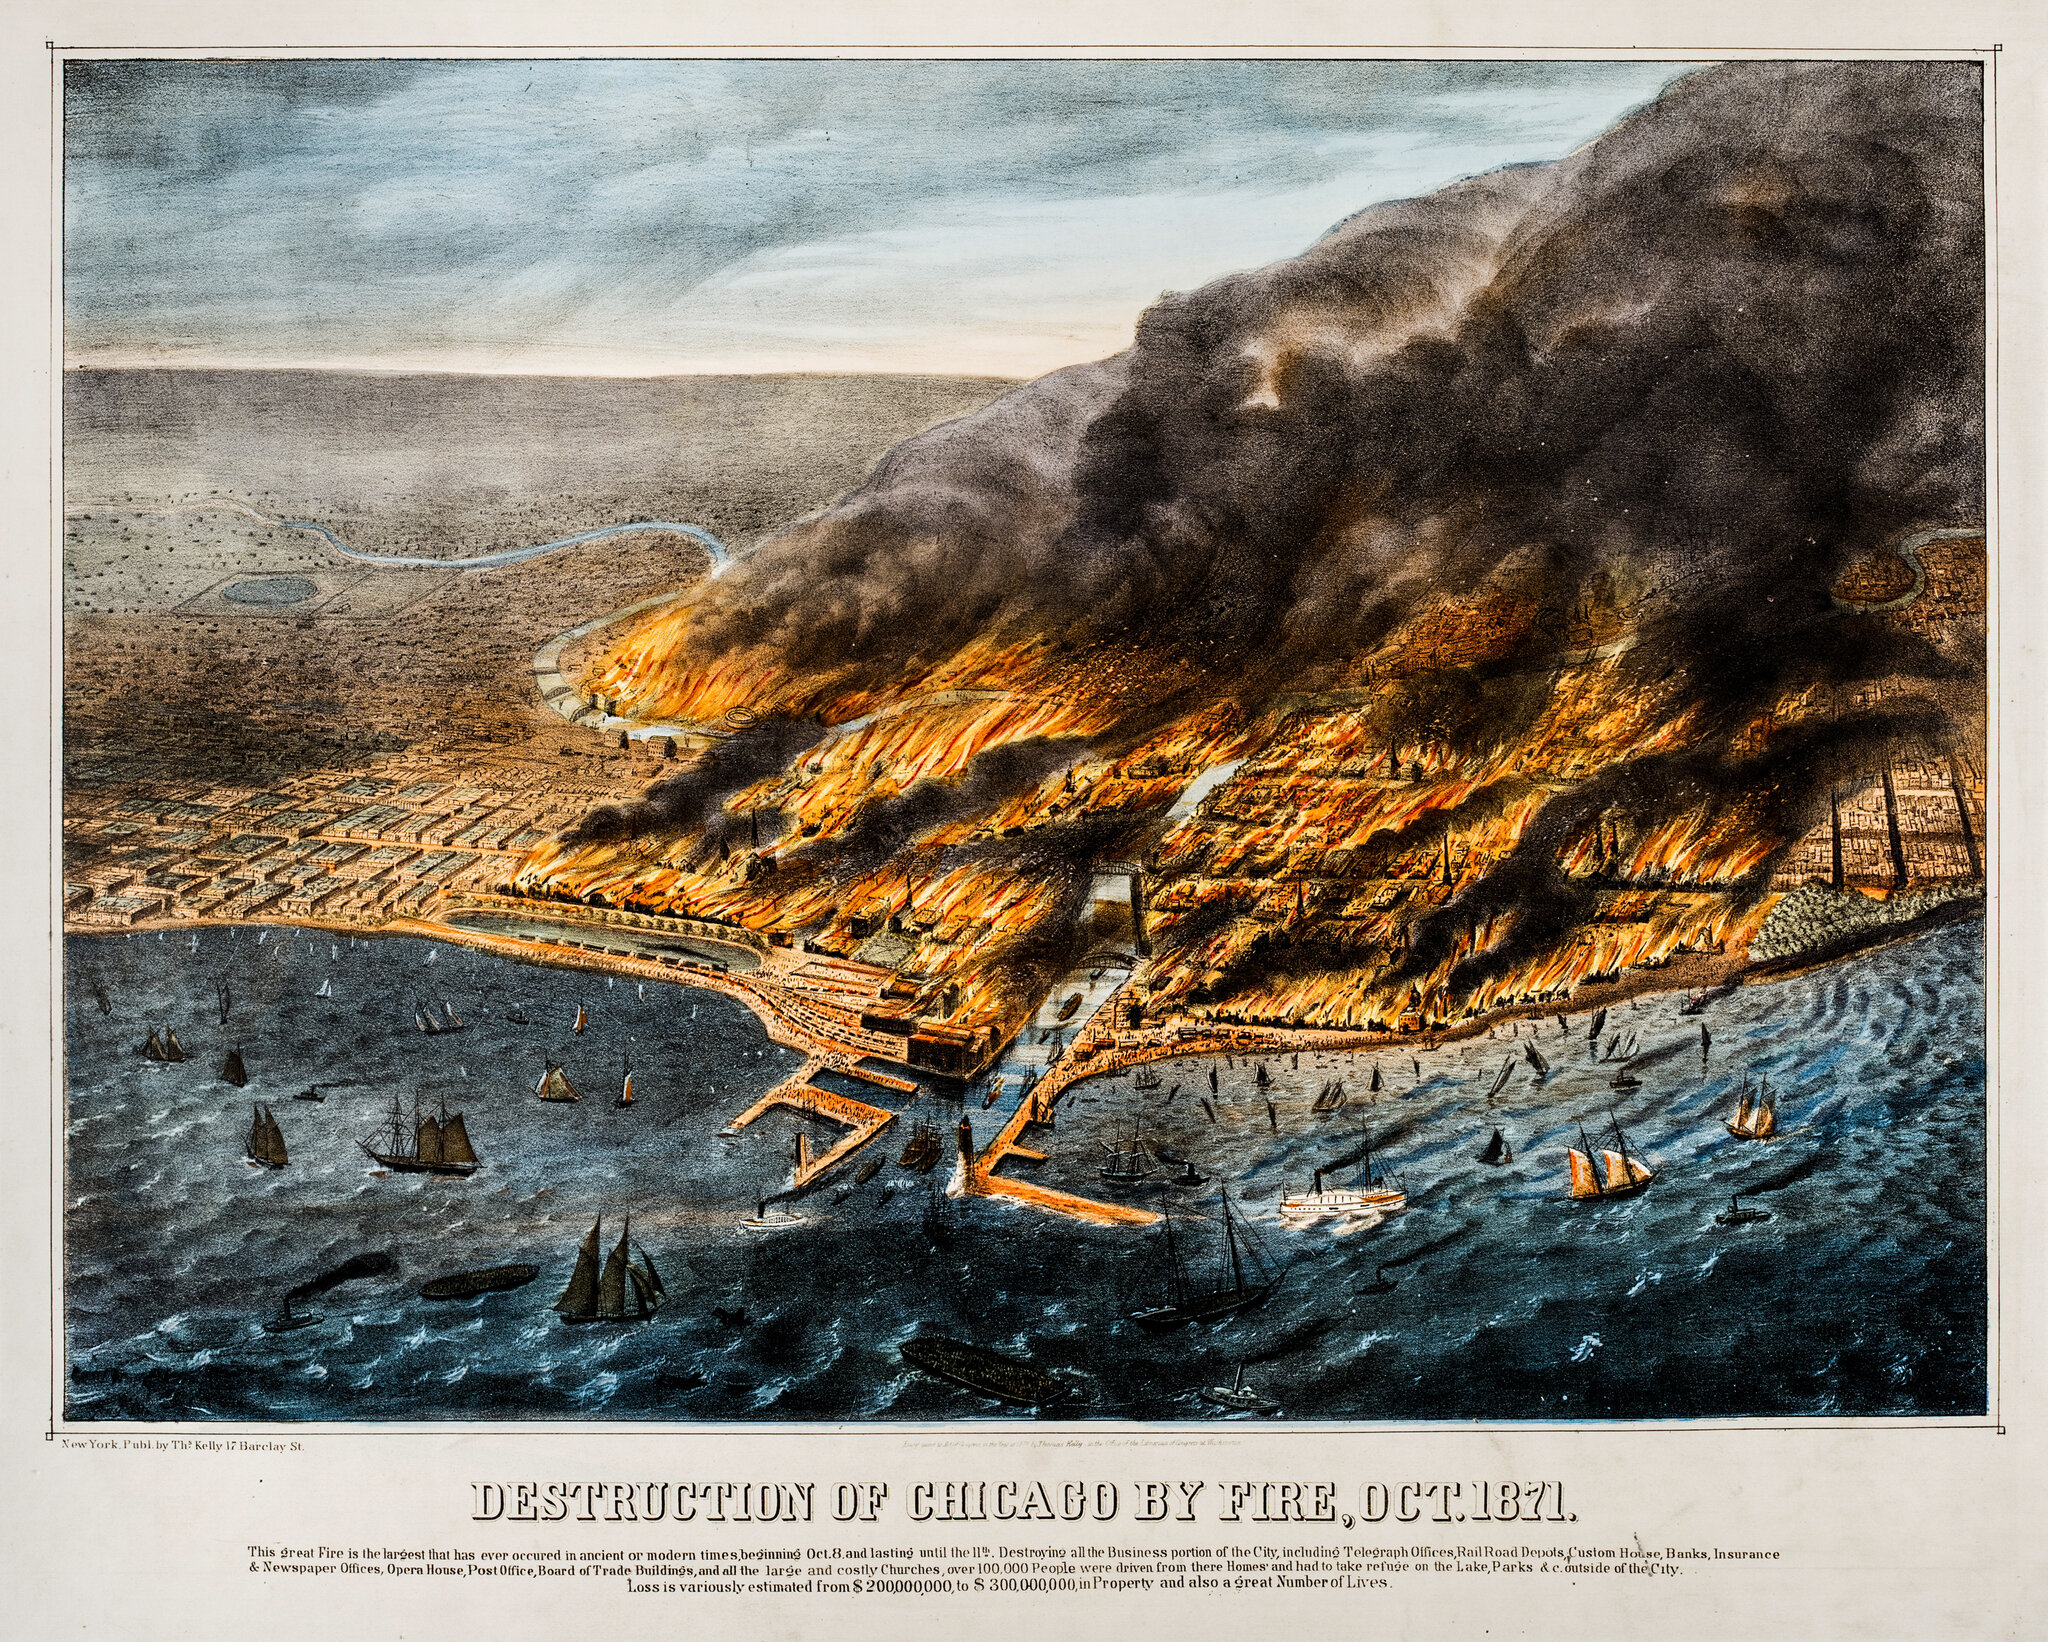 did a cow really cause the chicago fire in 1871